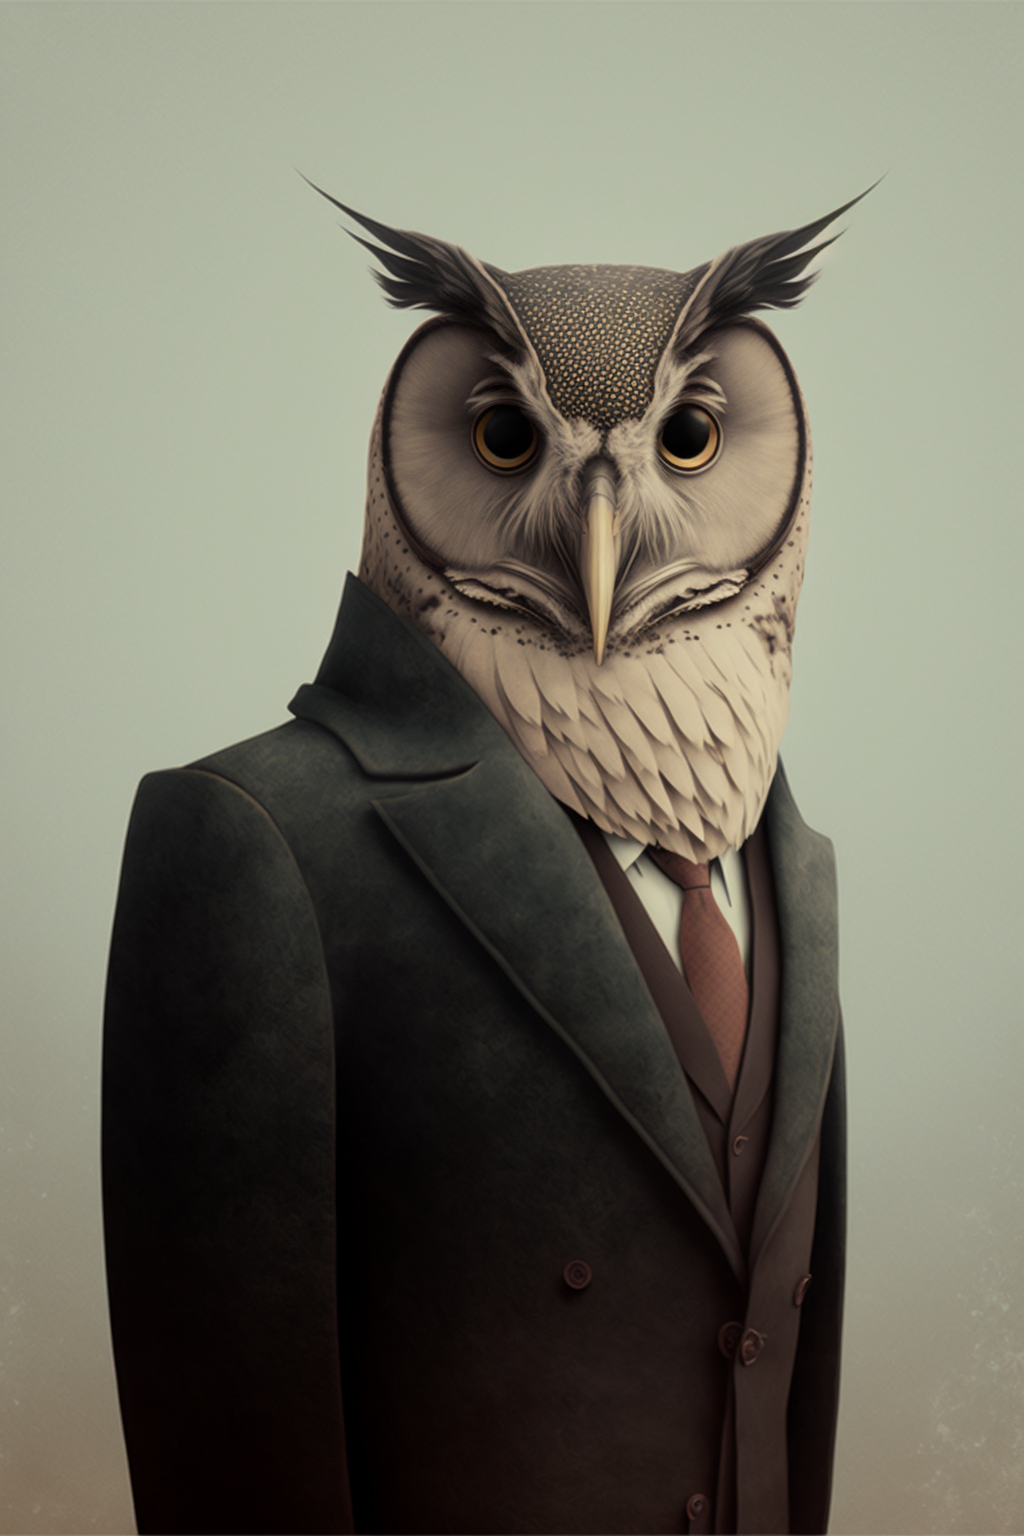 Owl in the style of Minimalist Surrealism 2